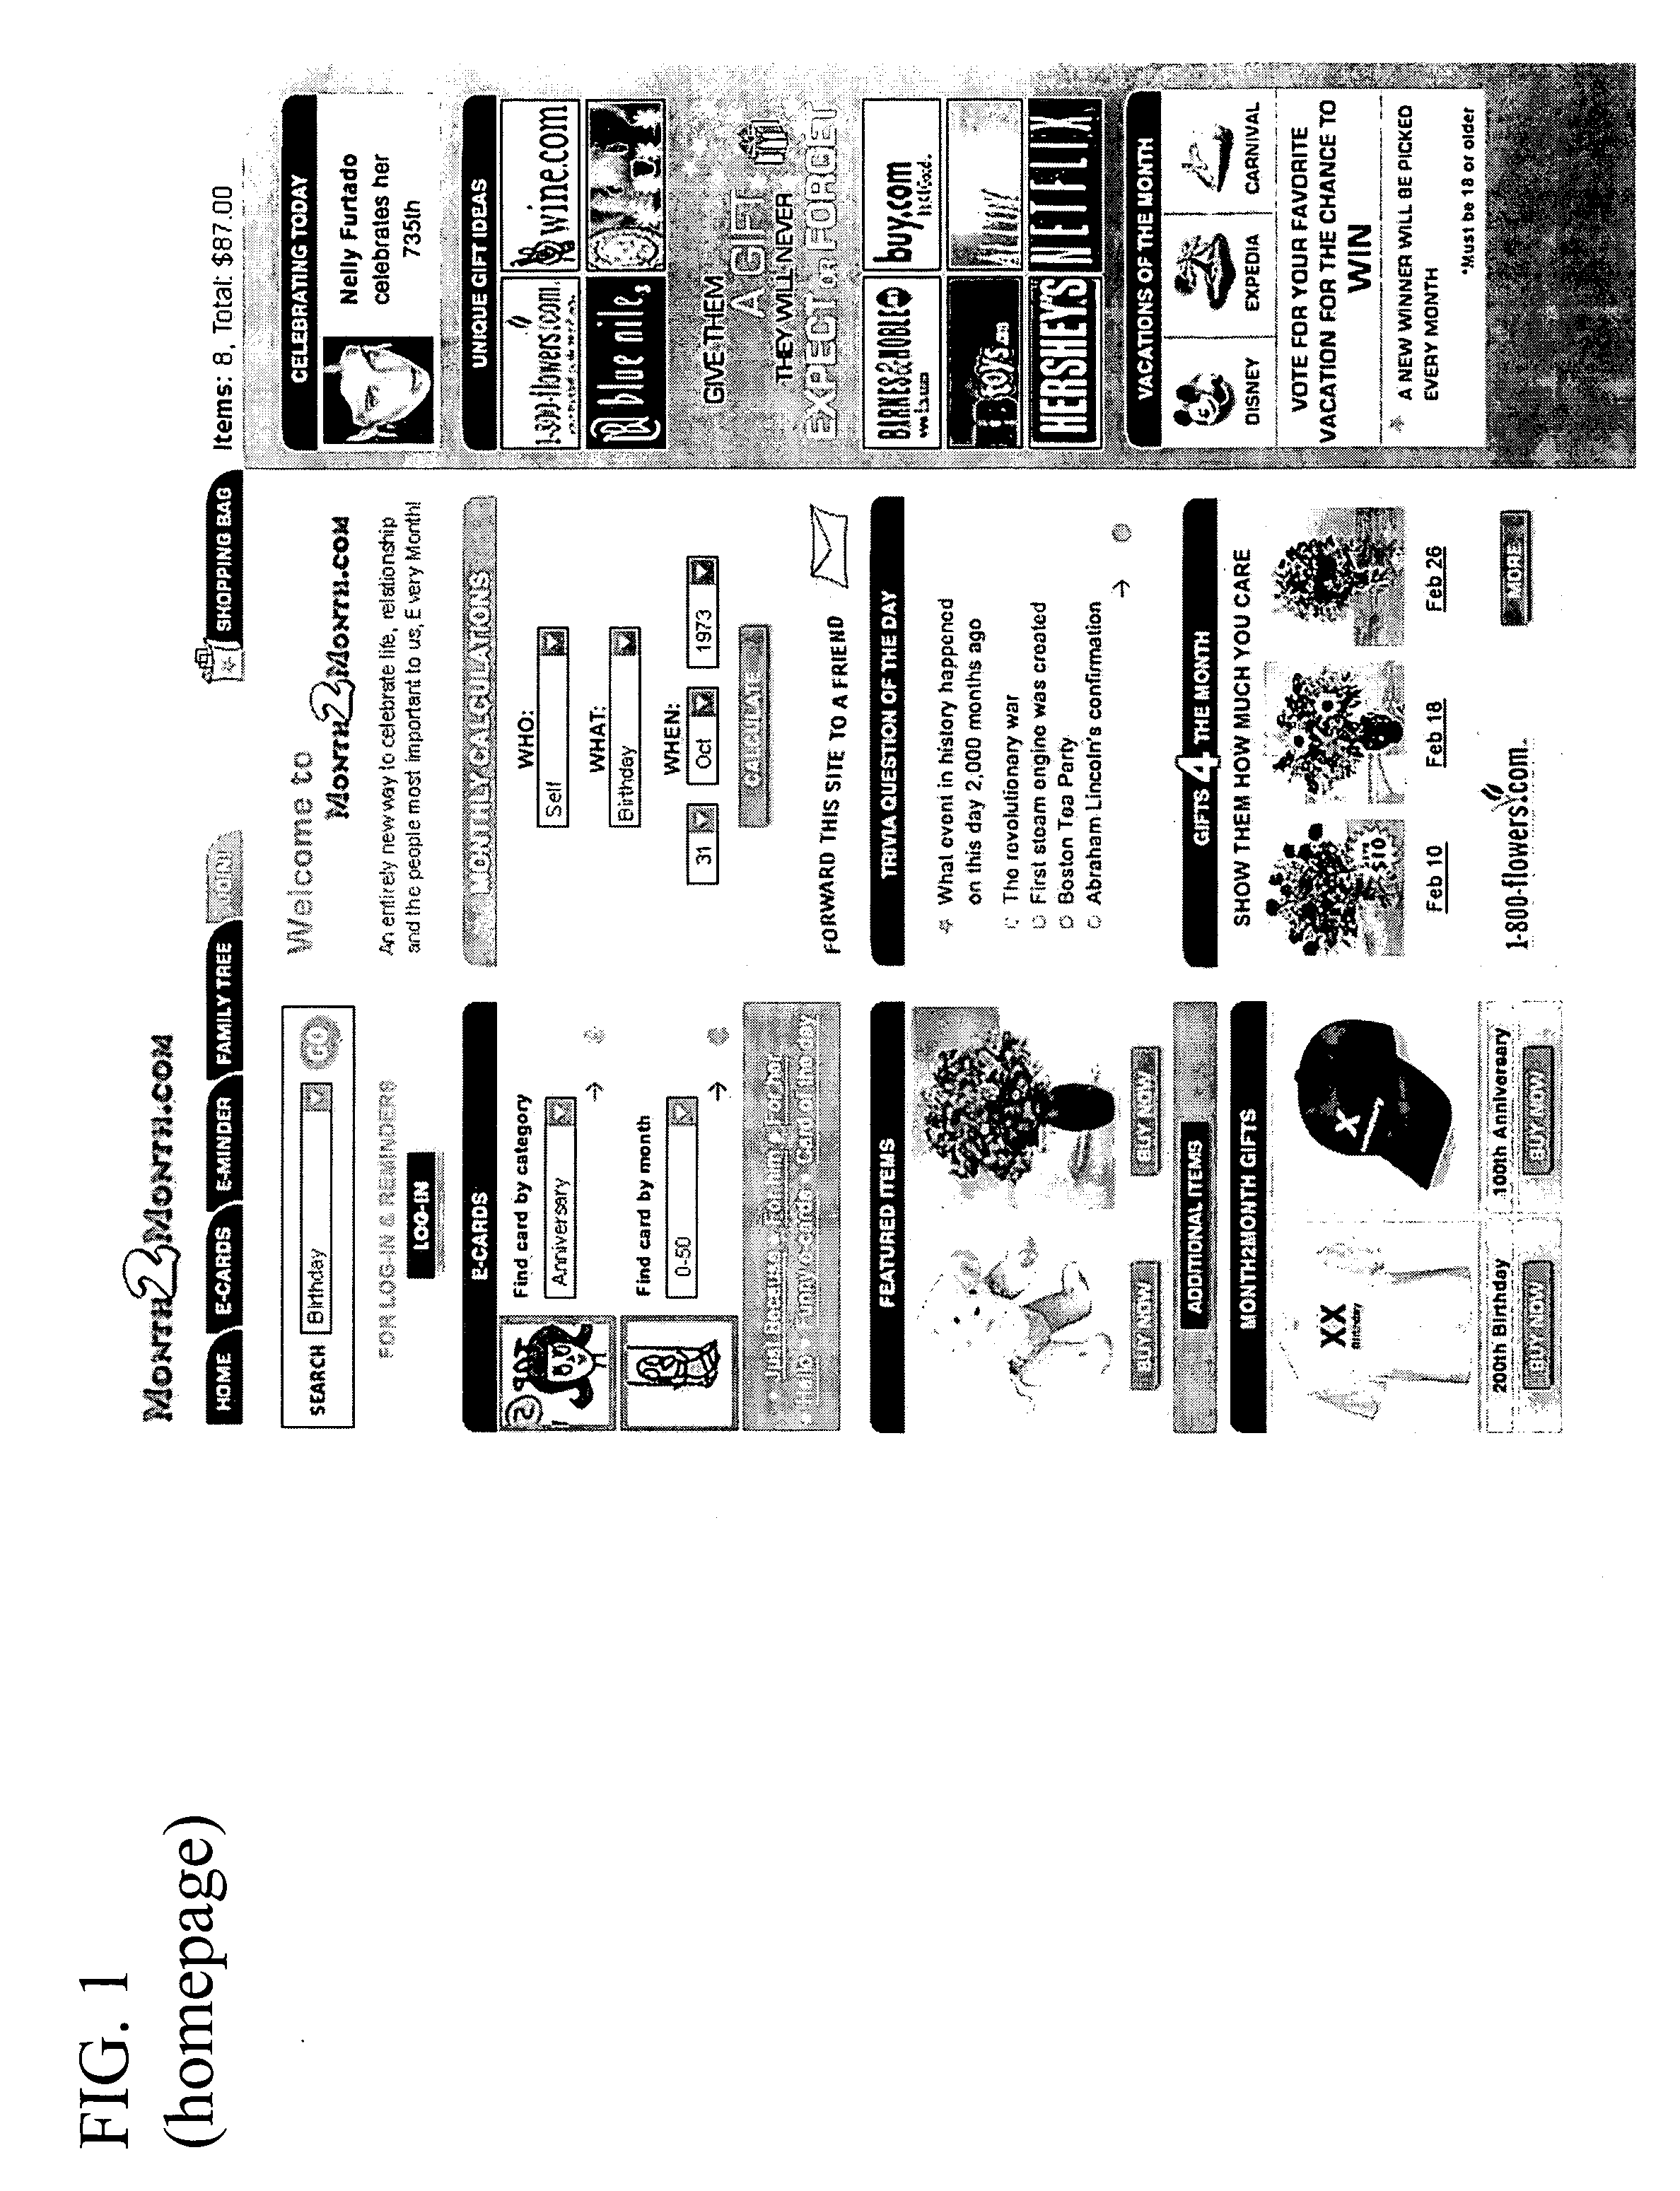 Electronic cards systems and methods